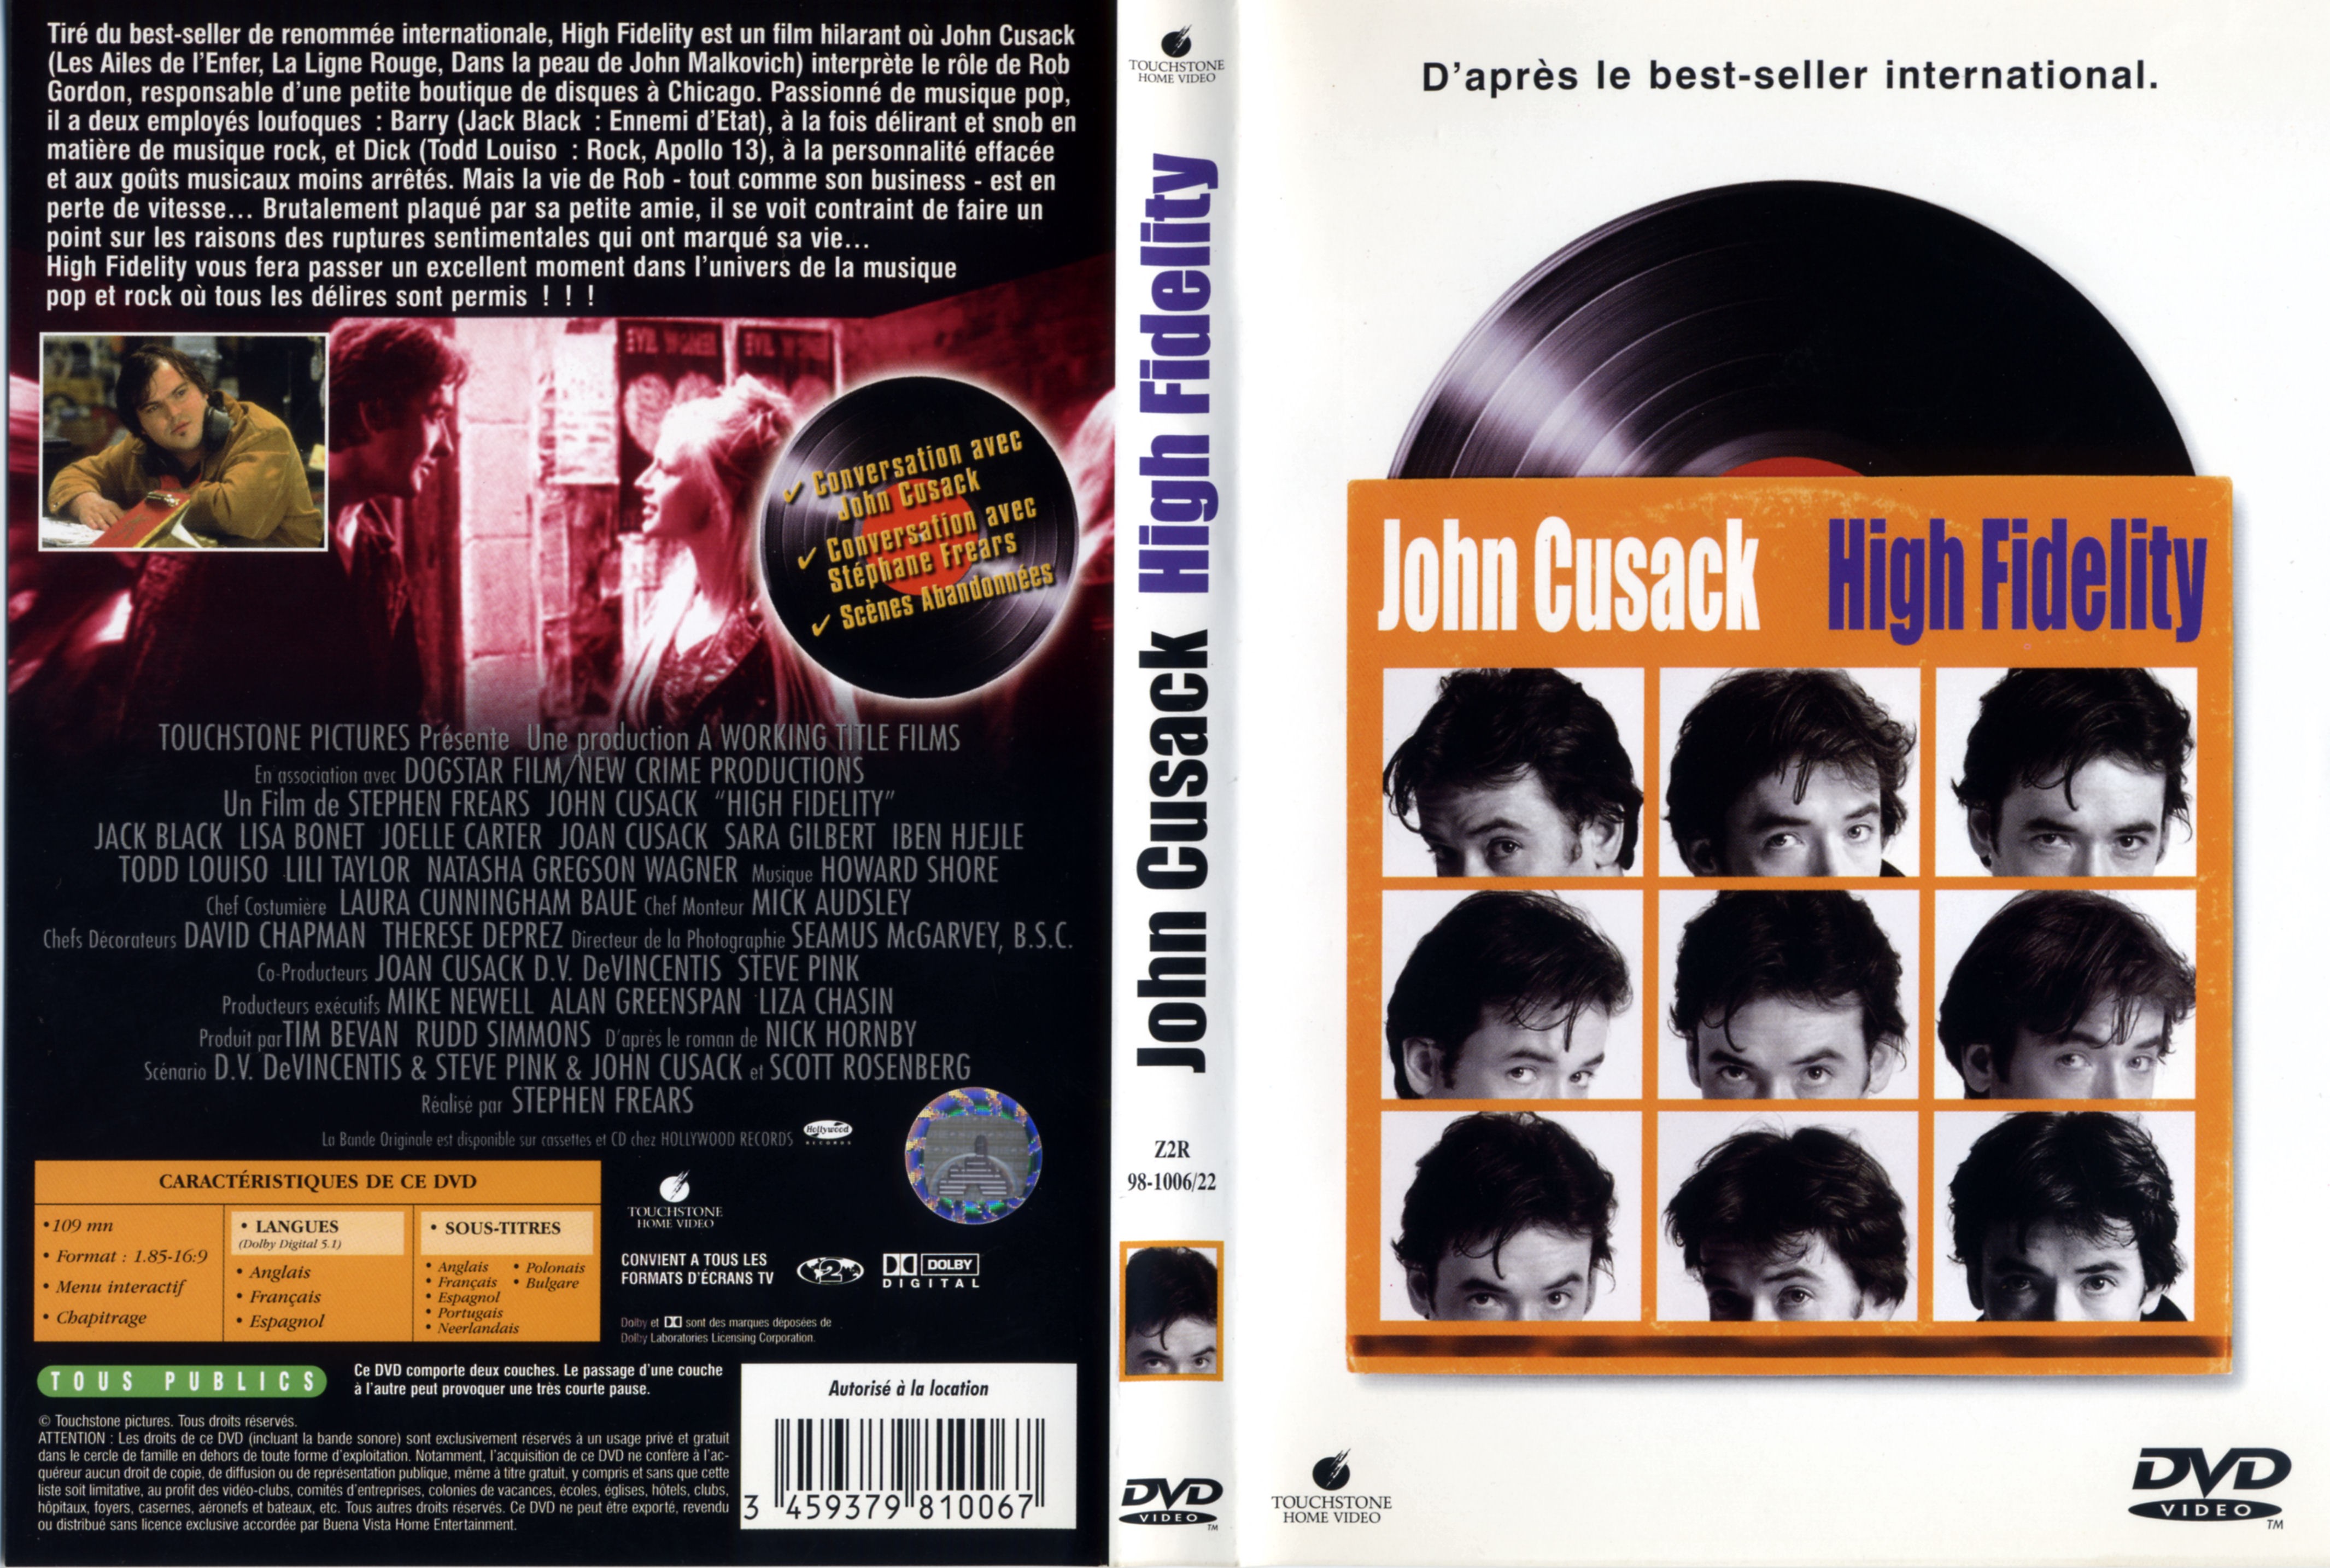 Jaquette DVD High fidelity